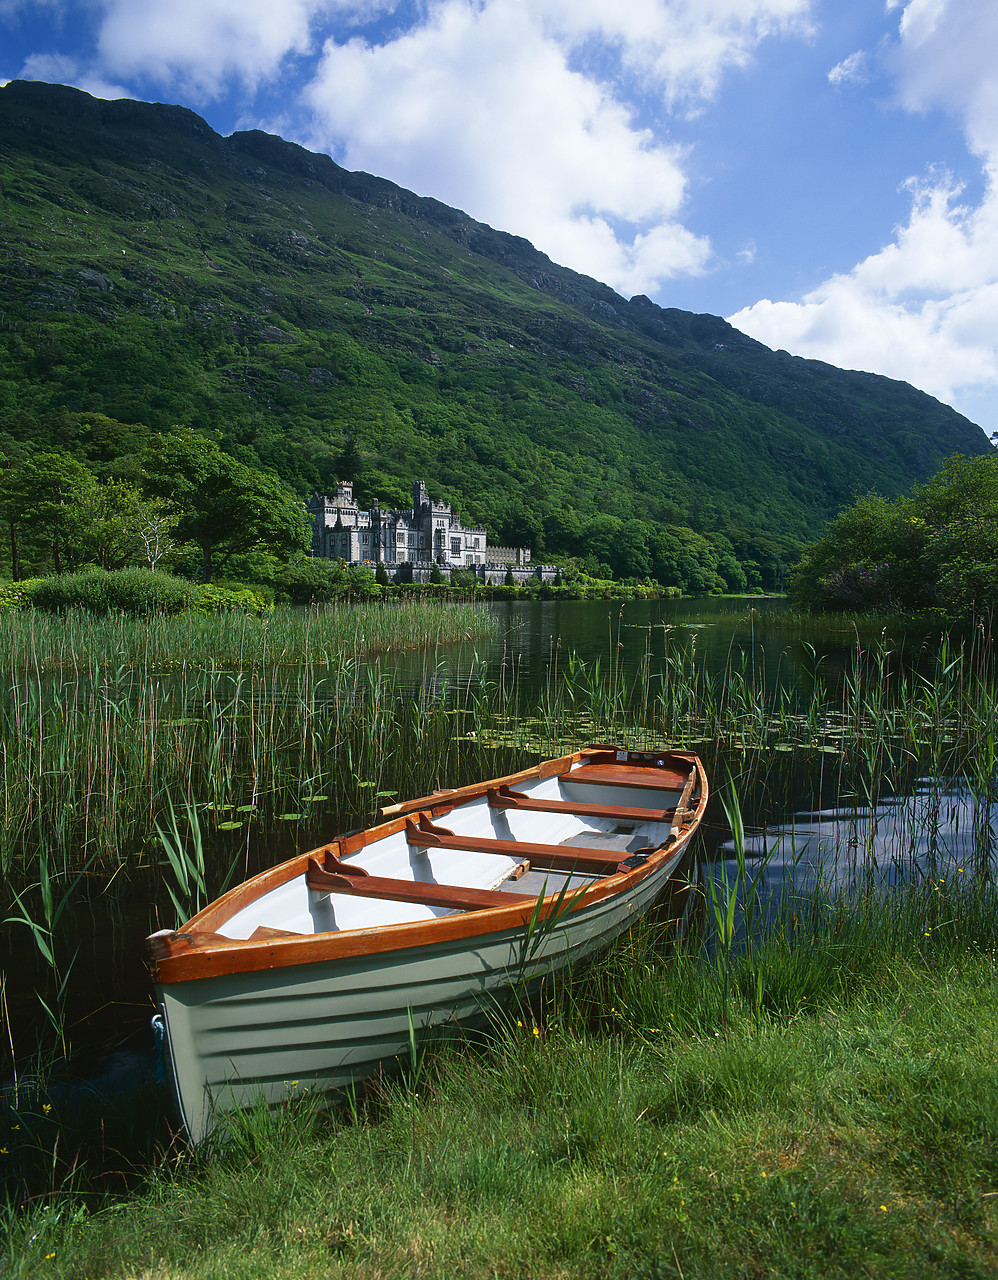 #990275-6 - Boat in Lake, Kylemore Abbey, Co. Galway, Southern Ireland